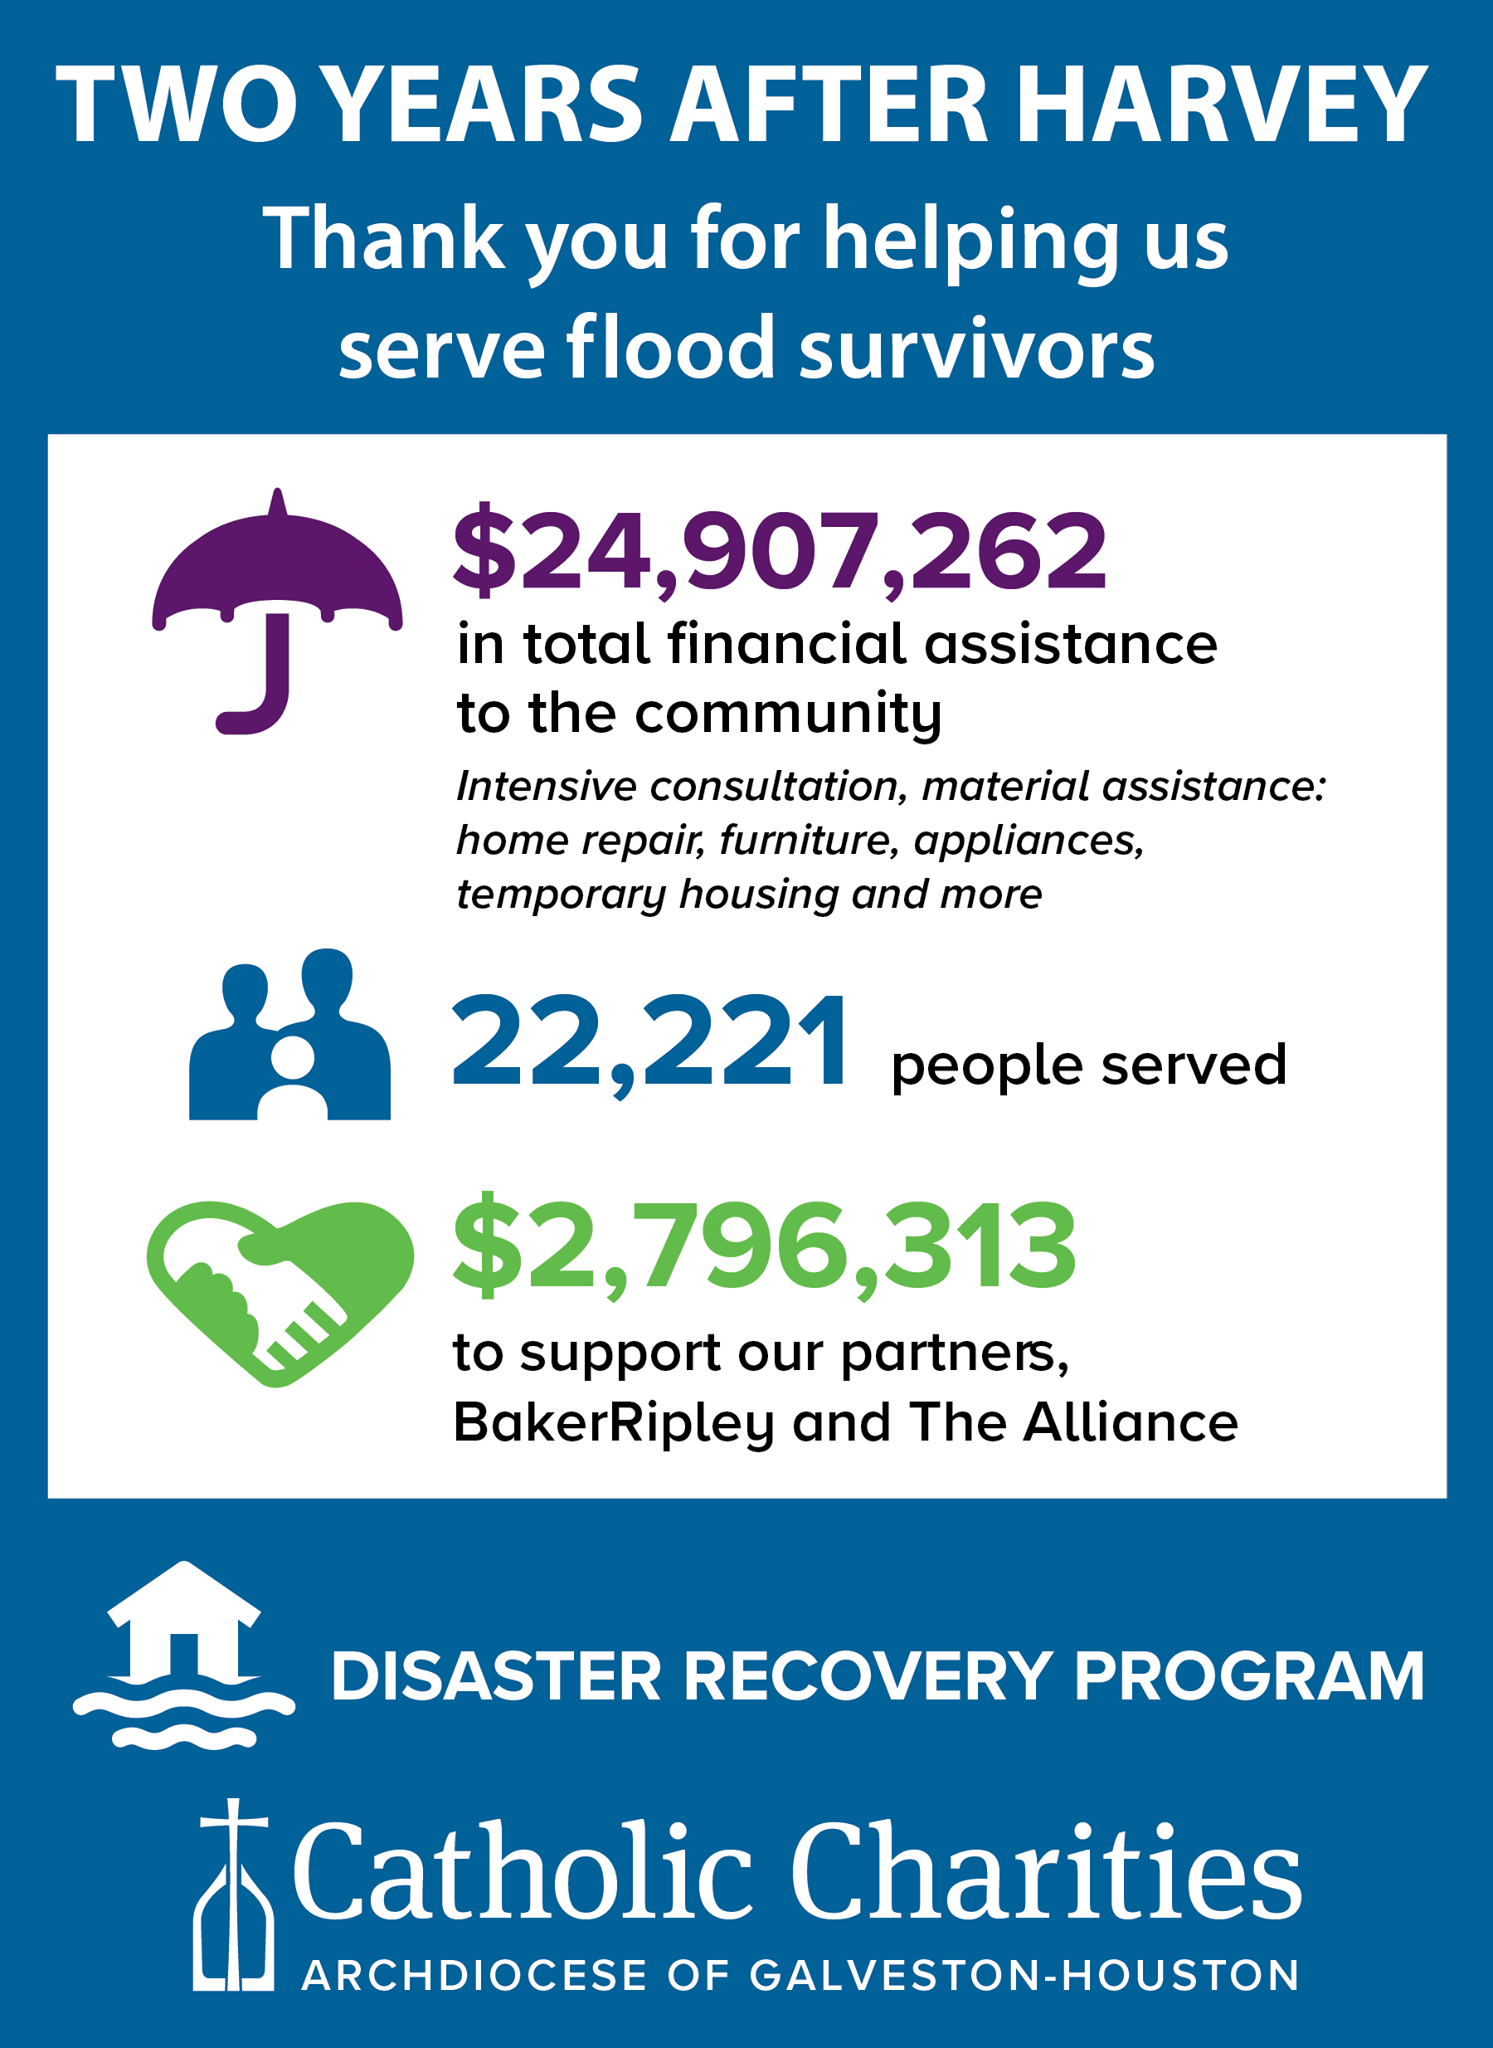 Catholic Charities has helped more than 22,000 people recover from Hurricane Harvey in the Houston area.